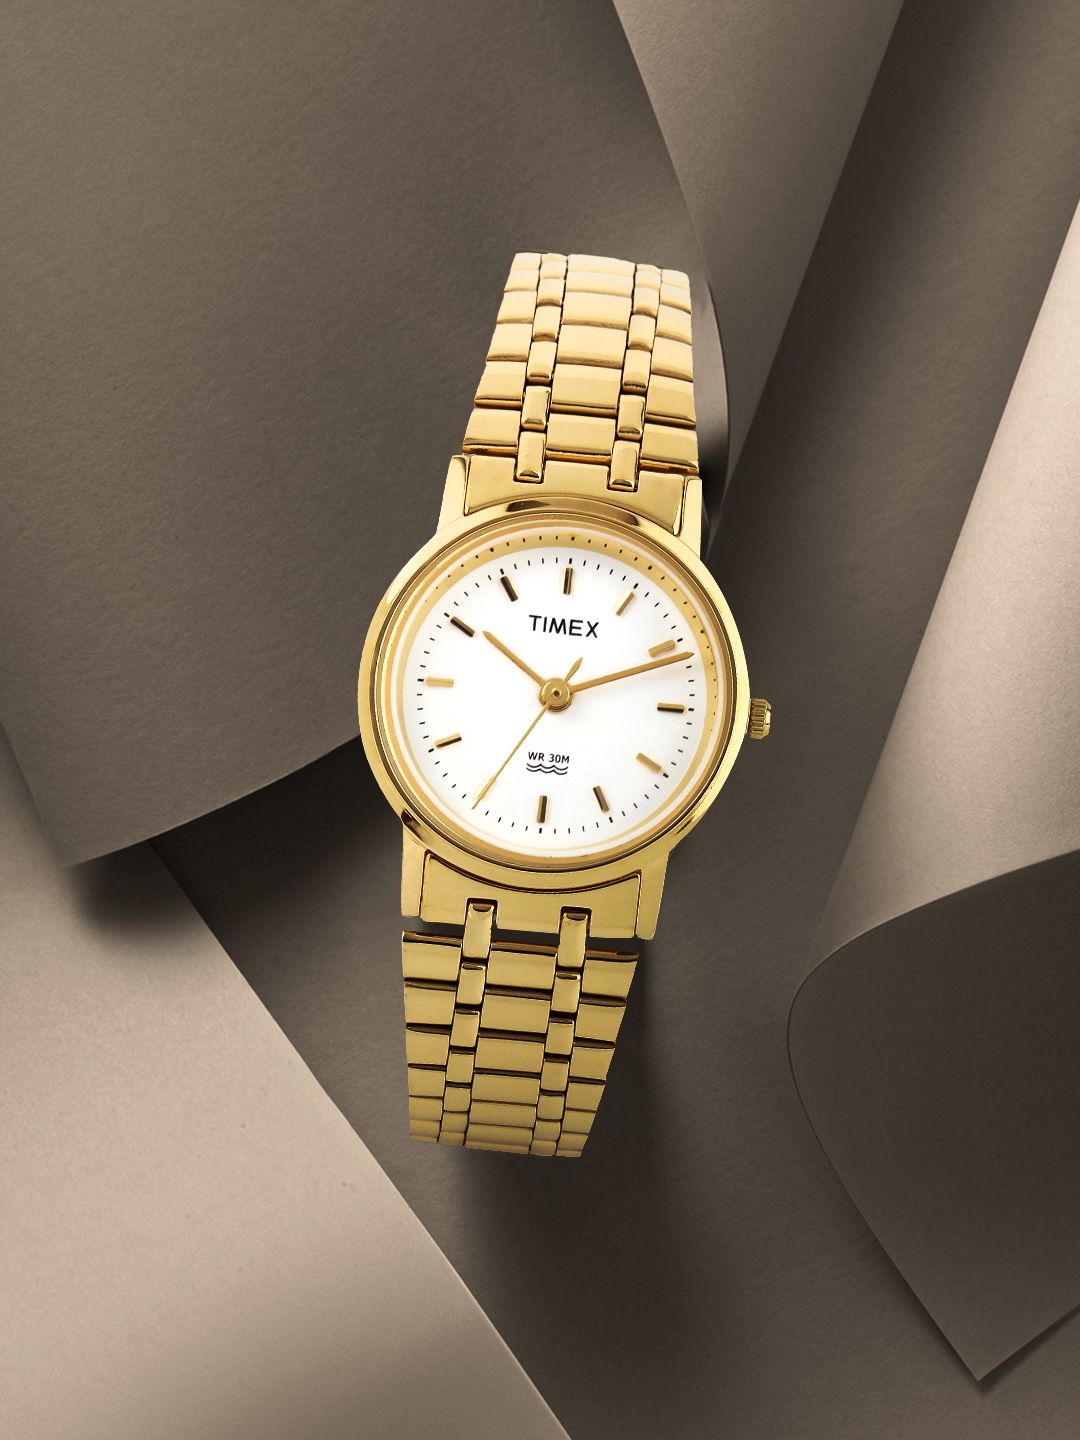 Timex Women White Analogue Watch - B303 Price in India